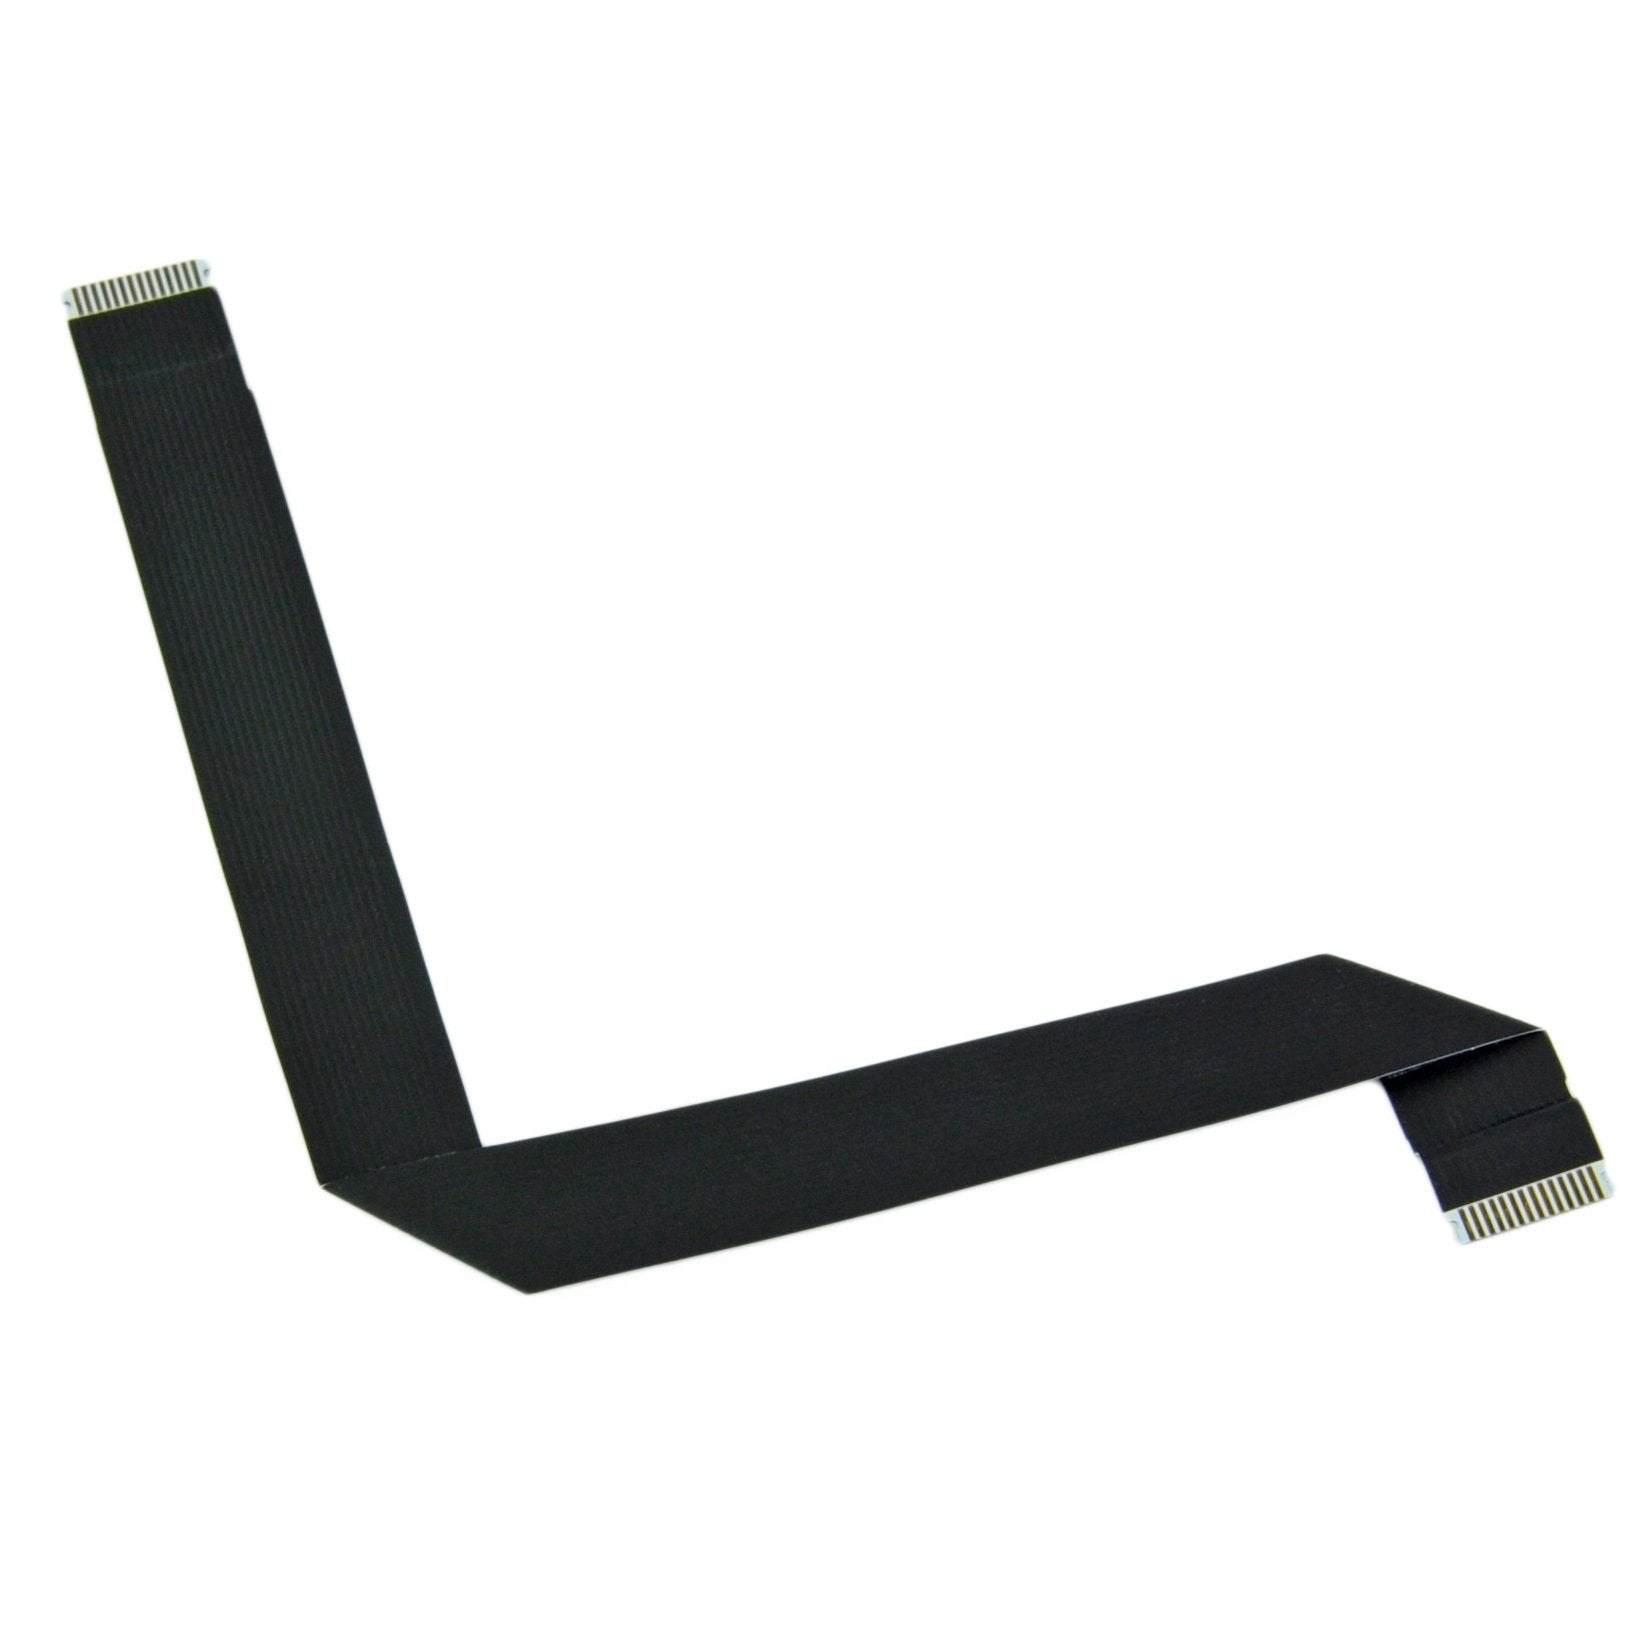 MacBook Air 13" (Mid 2011-Mid 2012) Trackpad Cable